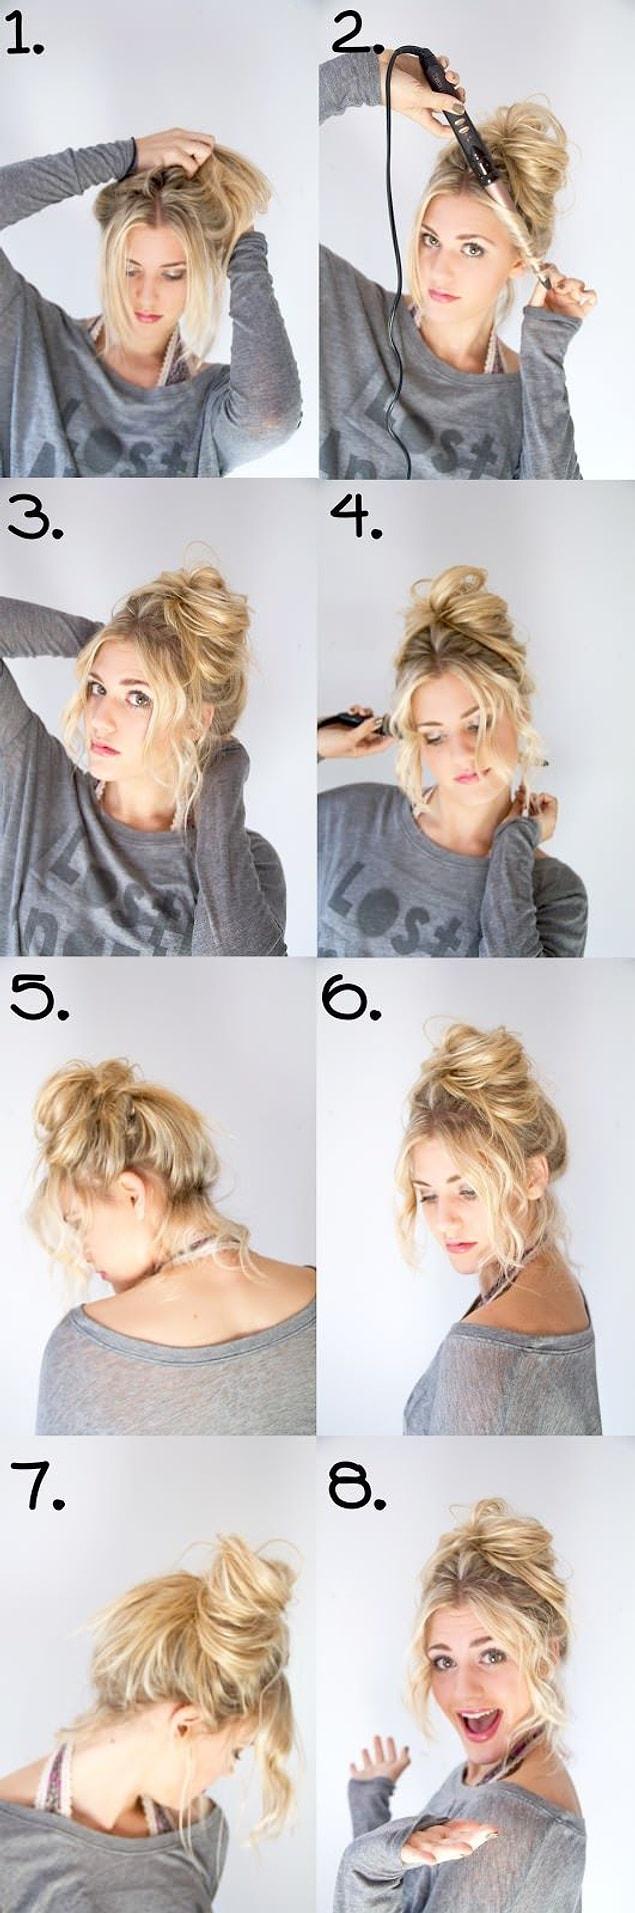 2. You can go for a more casual look with a loose bun if you want!